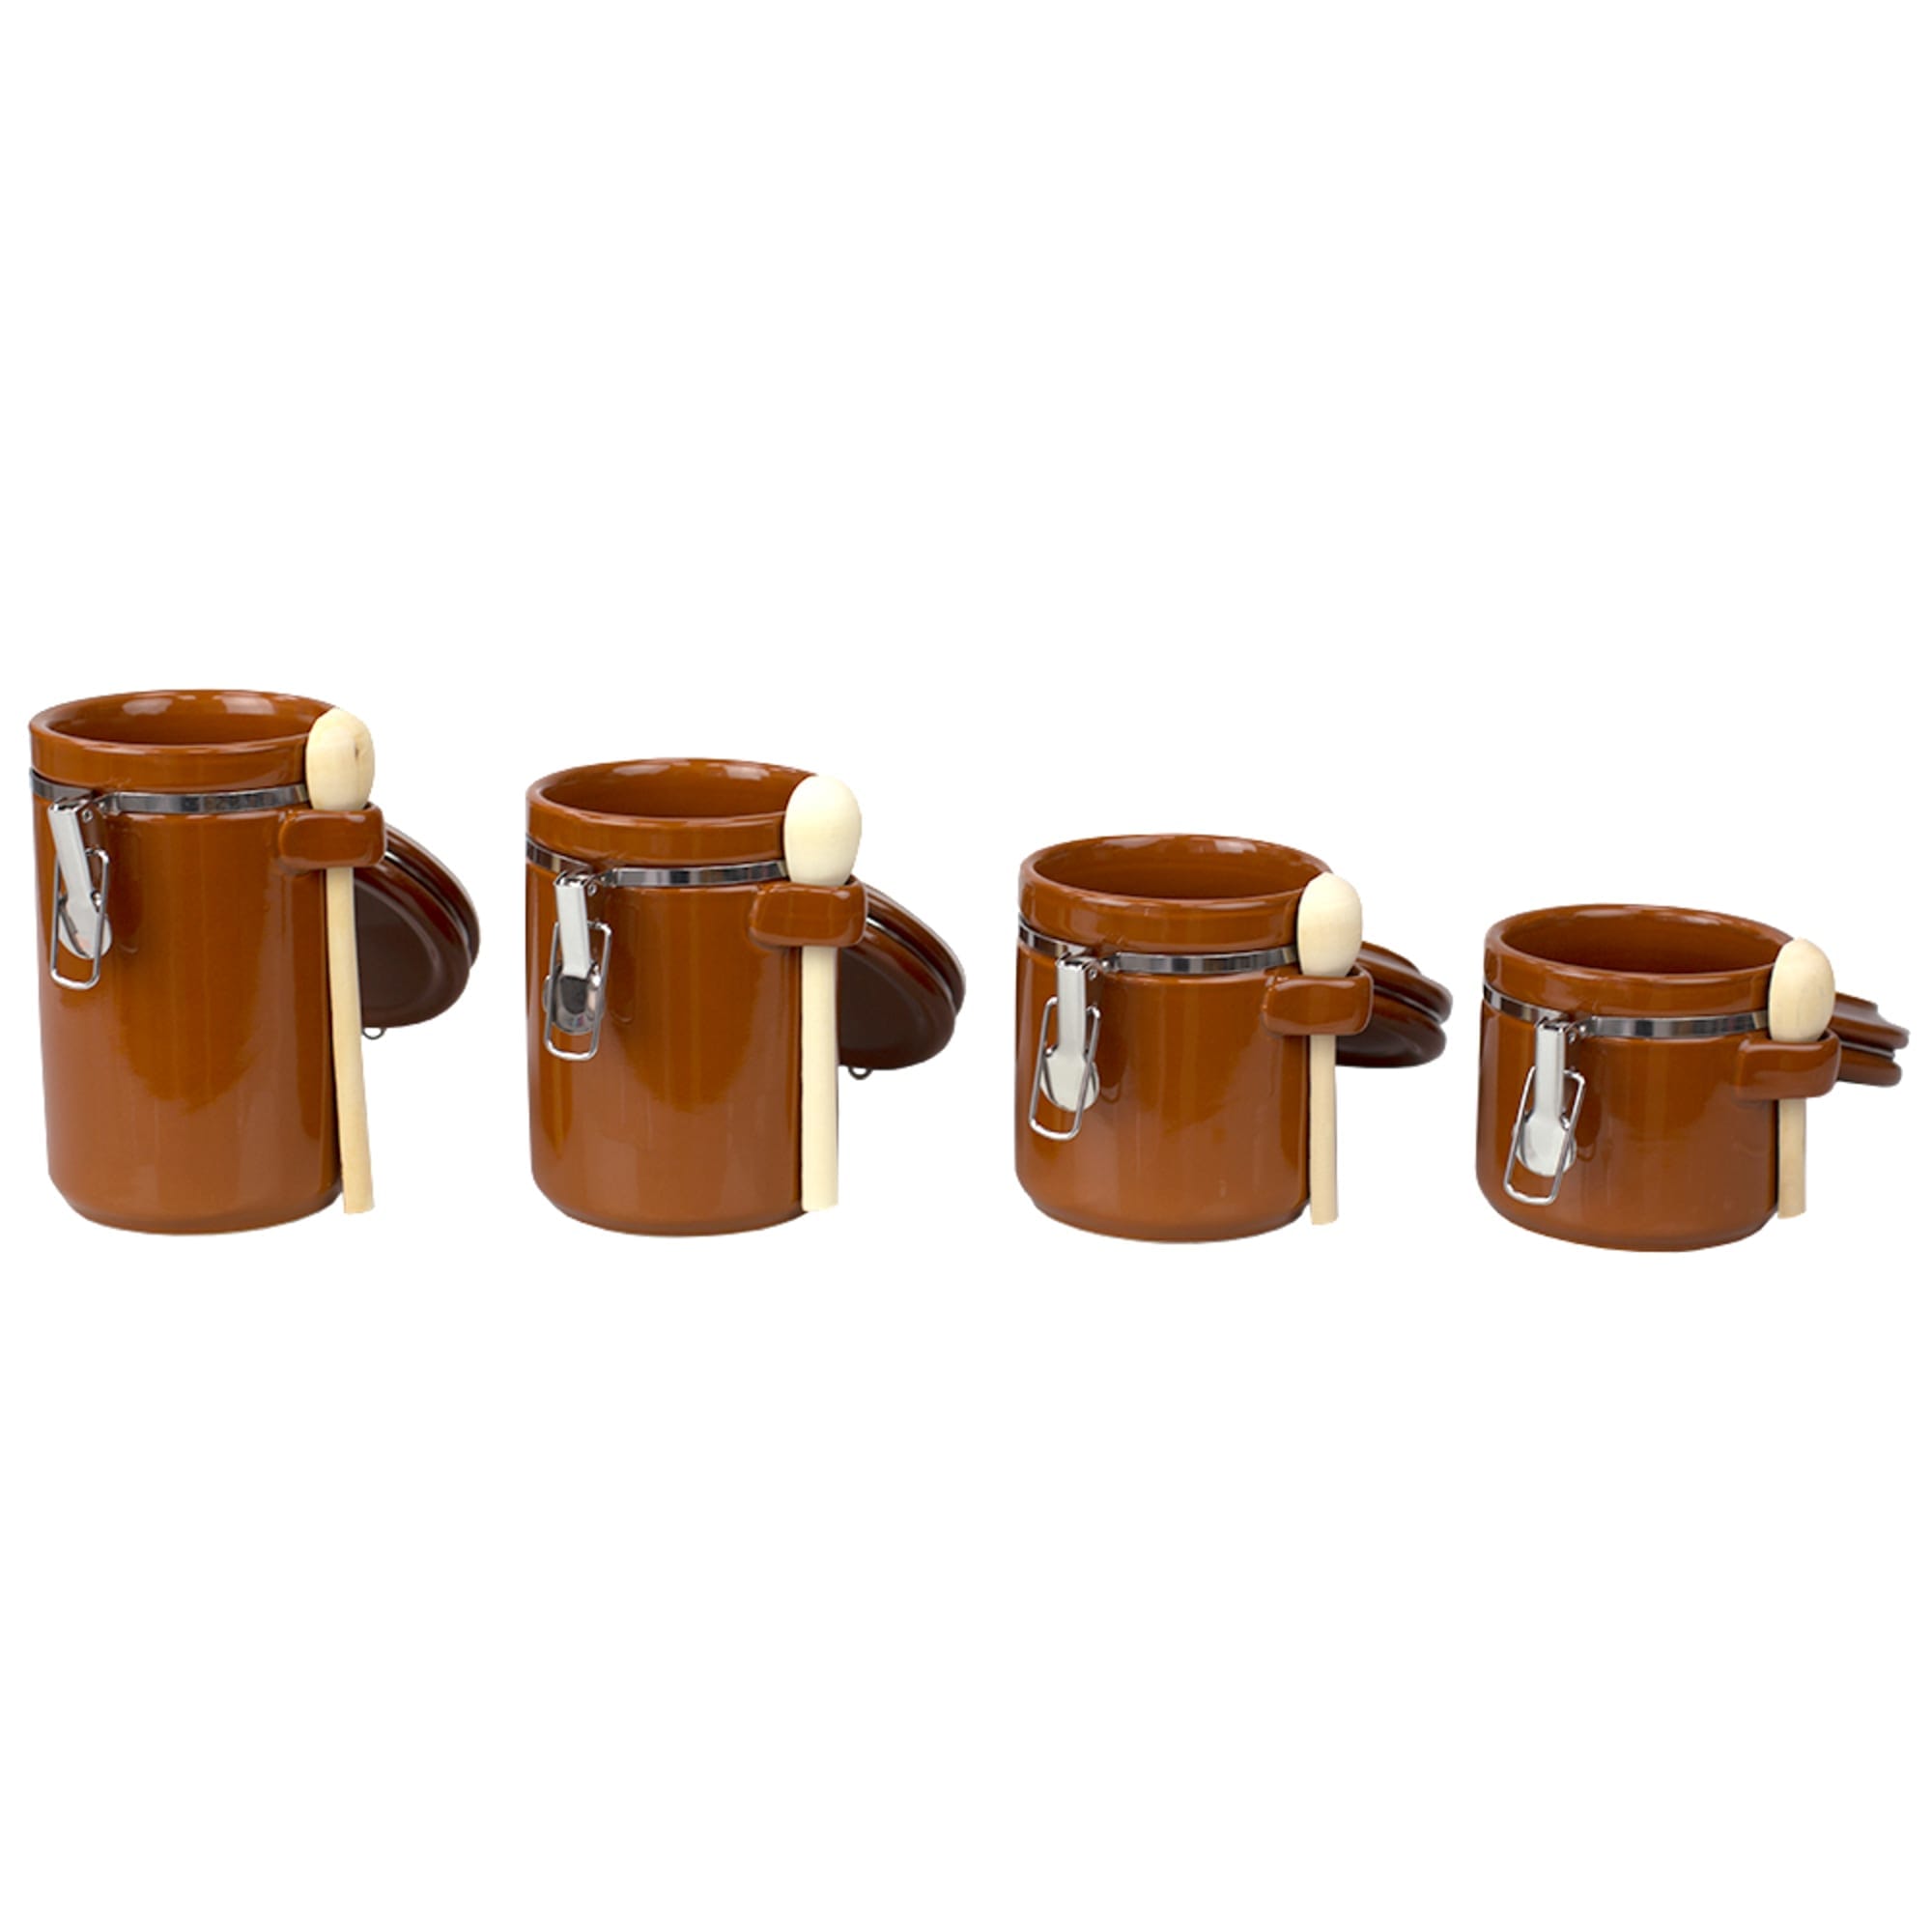 Home Basics 4 Piece Ceramic Canisters with Easy Open Air-Tight Clamp Top Lid and Wooden Spoons, Brown $20.00 EACH, CASE PACK OF 2